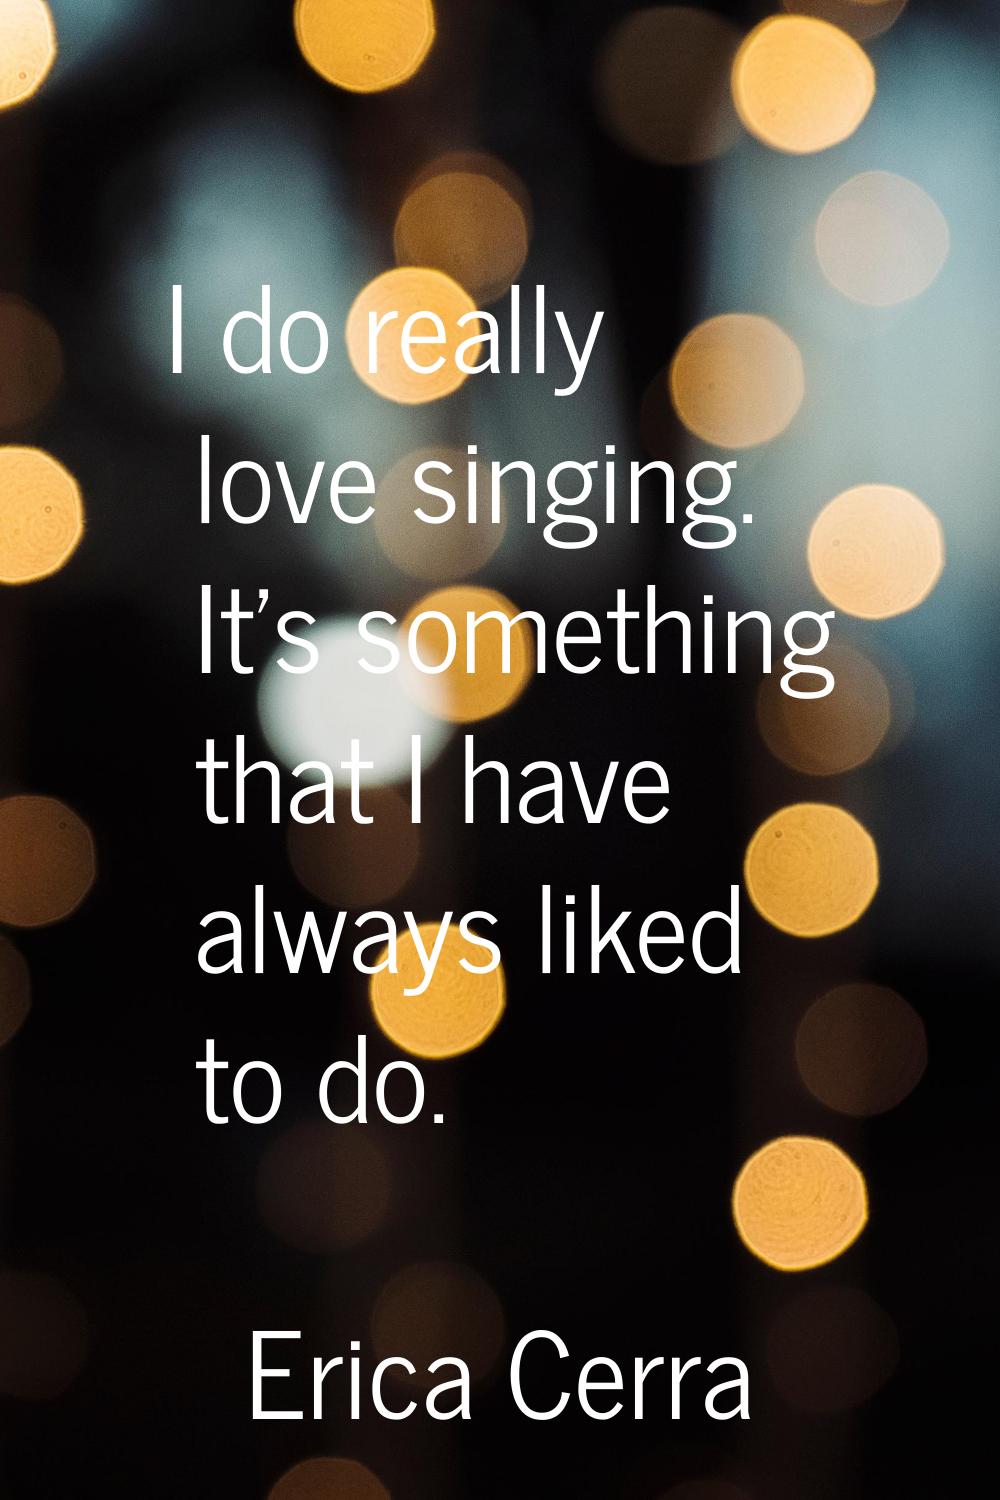 I do really love singing. It's something that I have always liked to do.